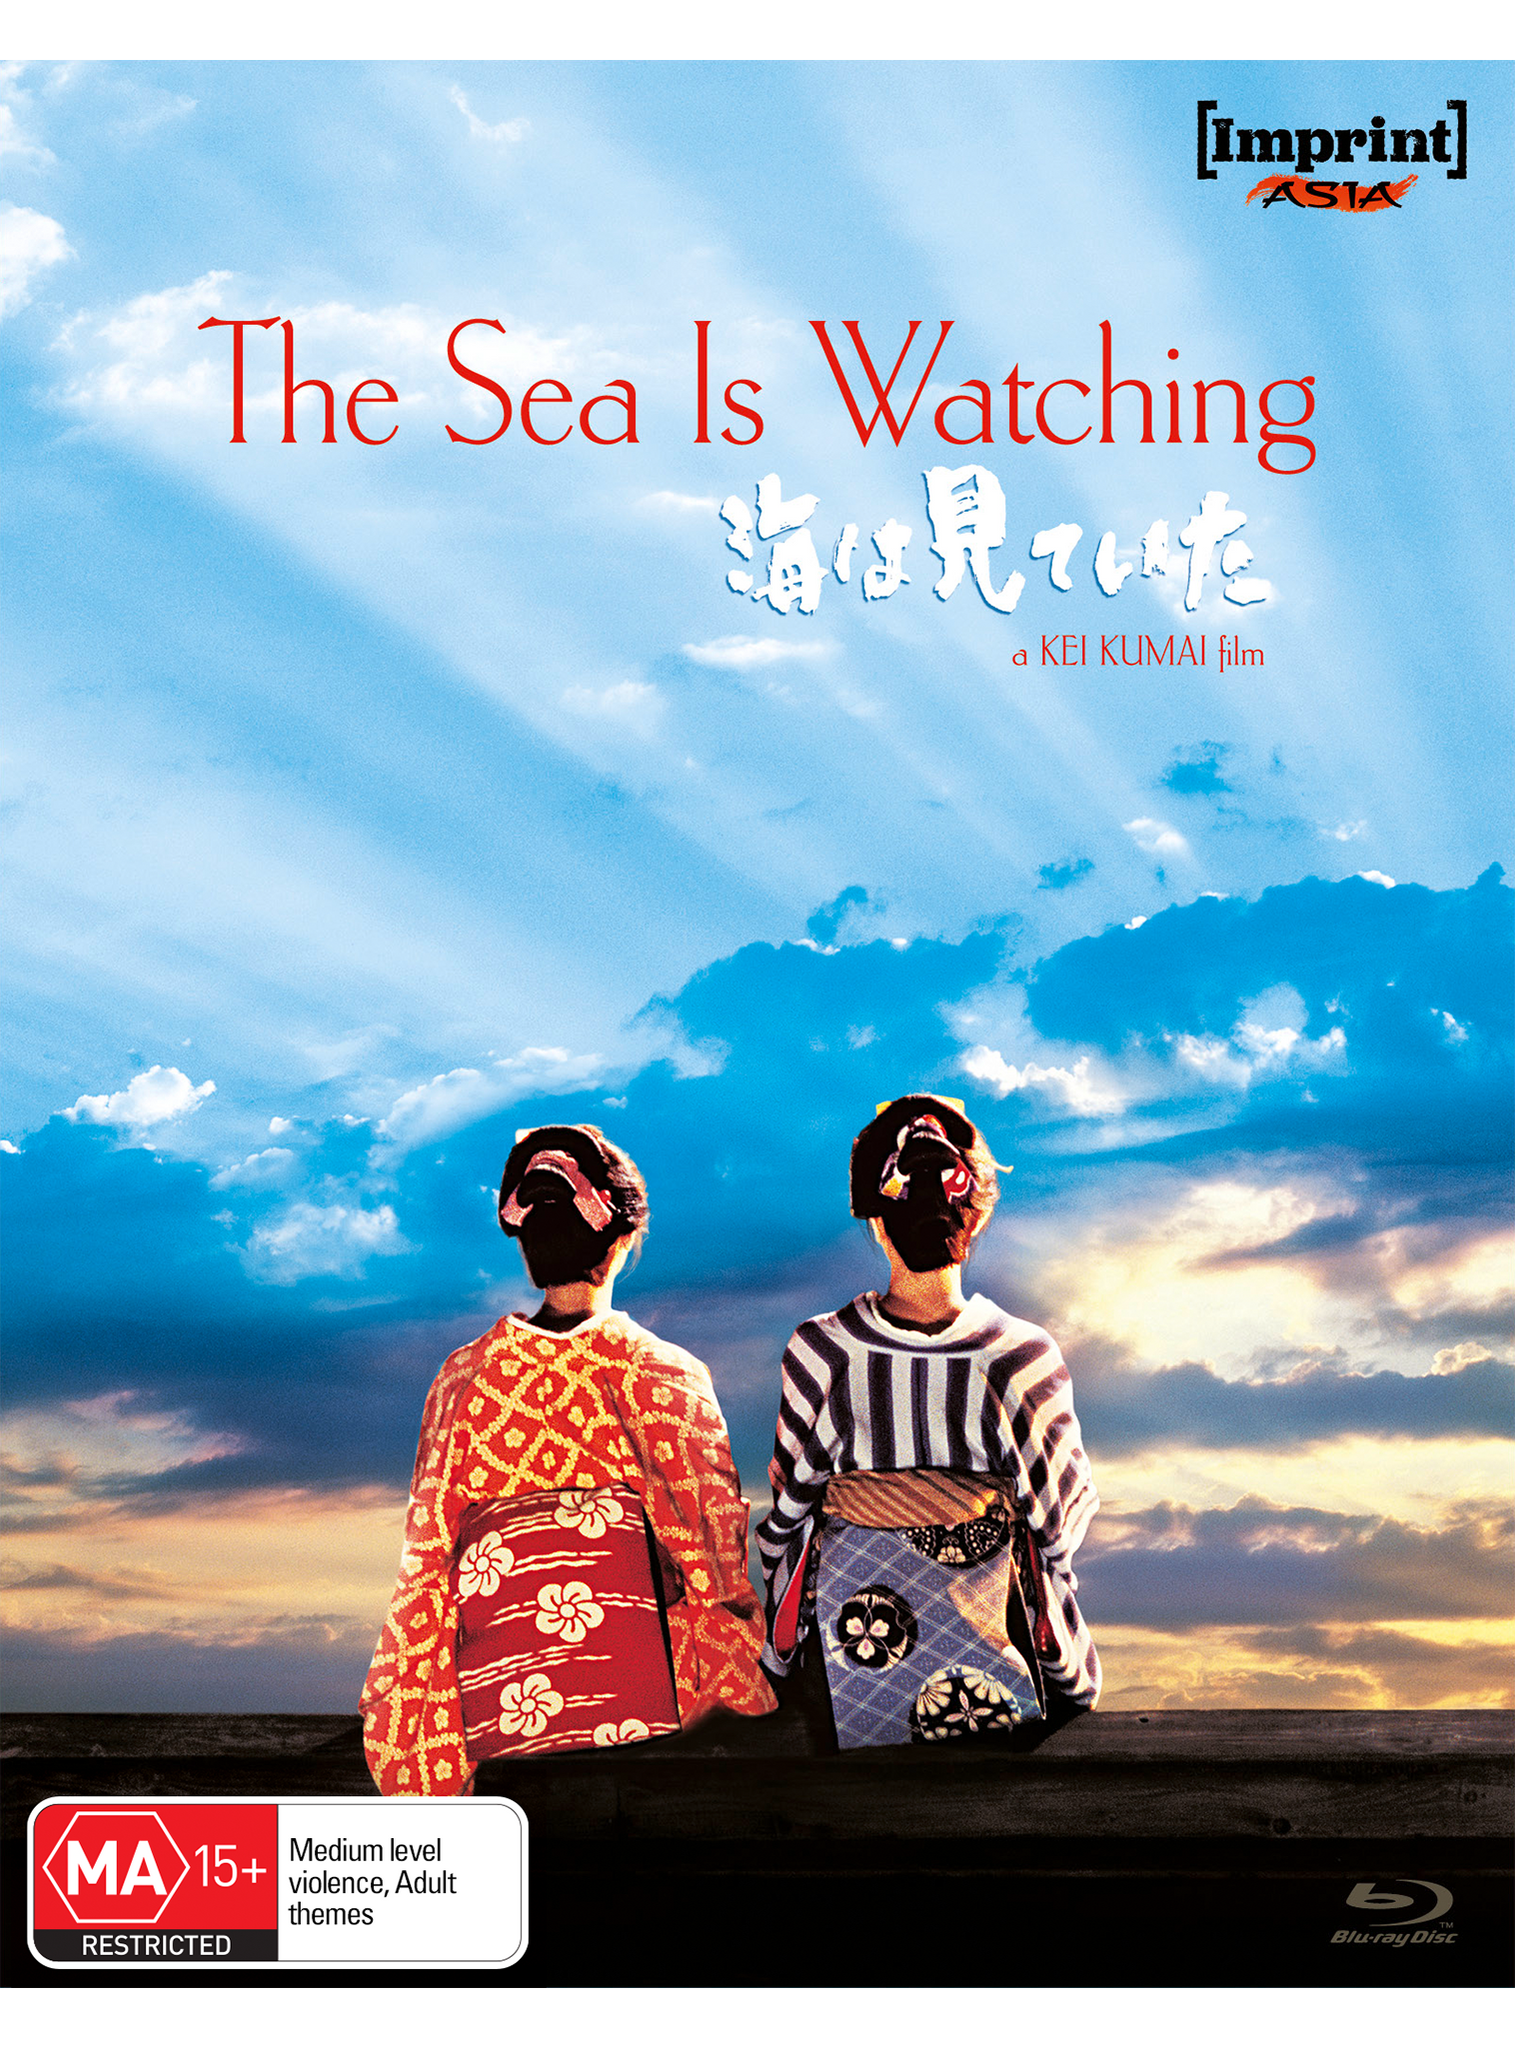 THE SEA IS WATCHING (IMPRINT ASIA COLLECTION #2) - BLU-RAY